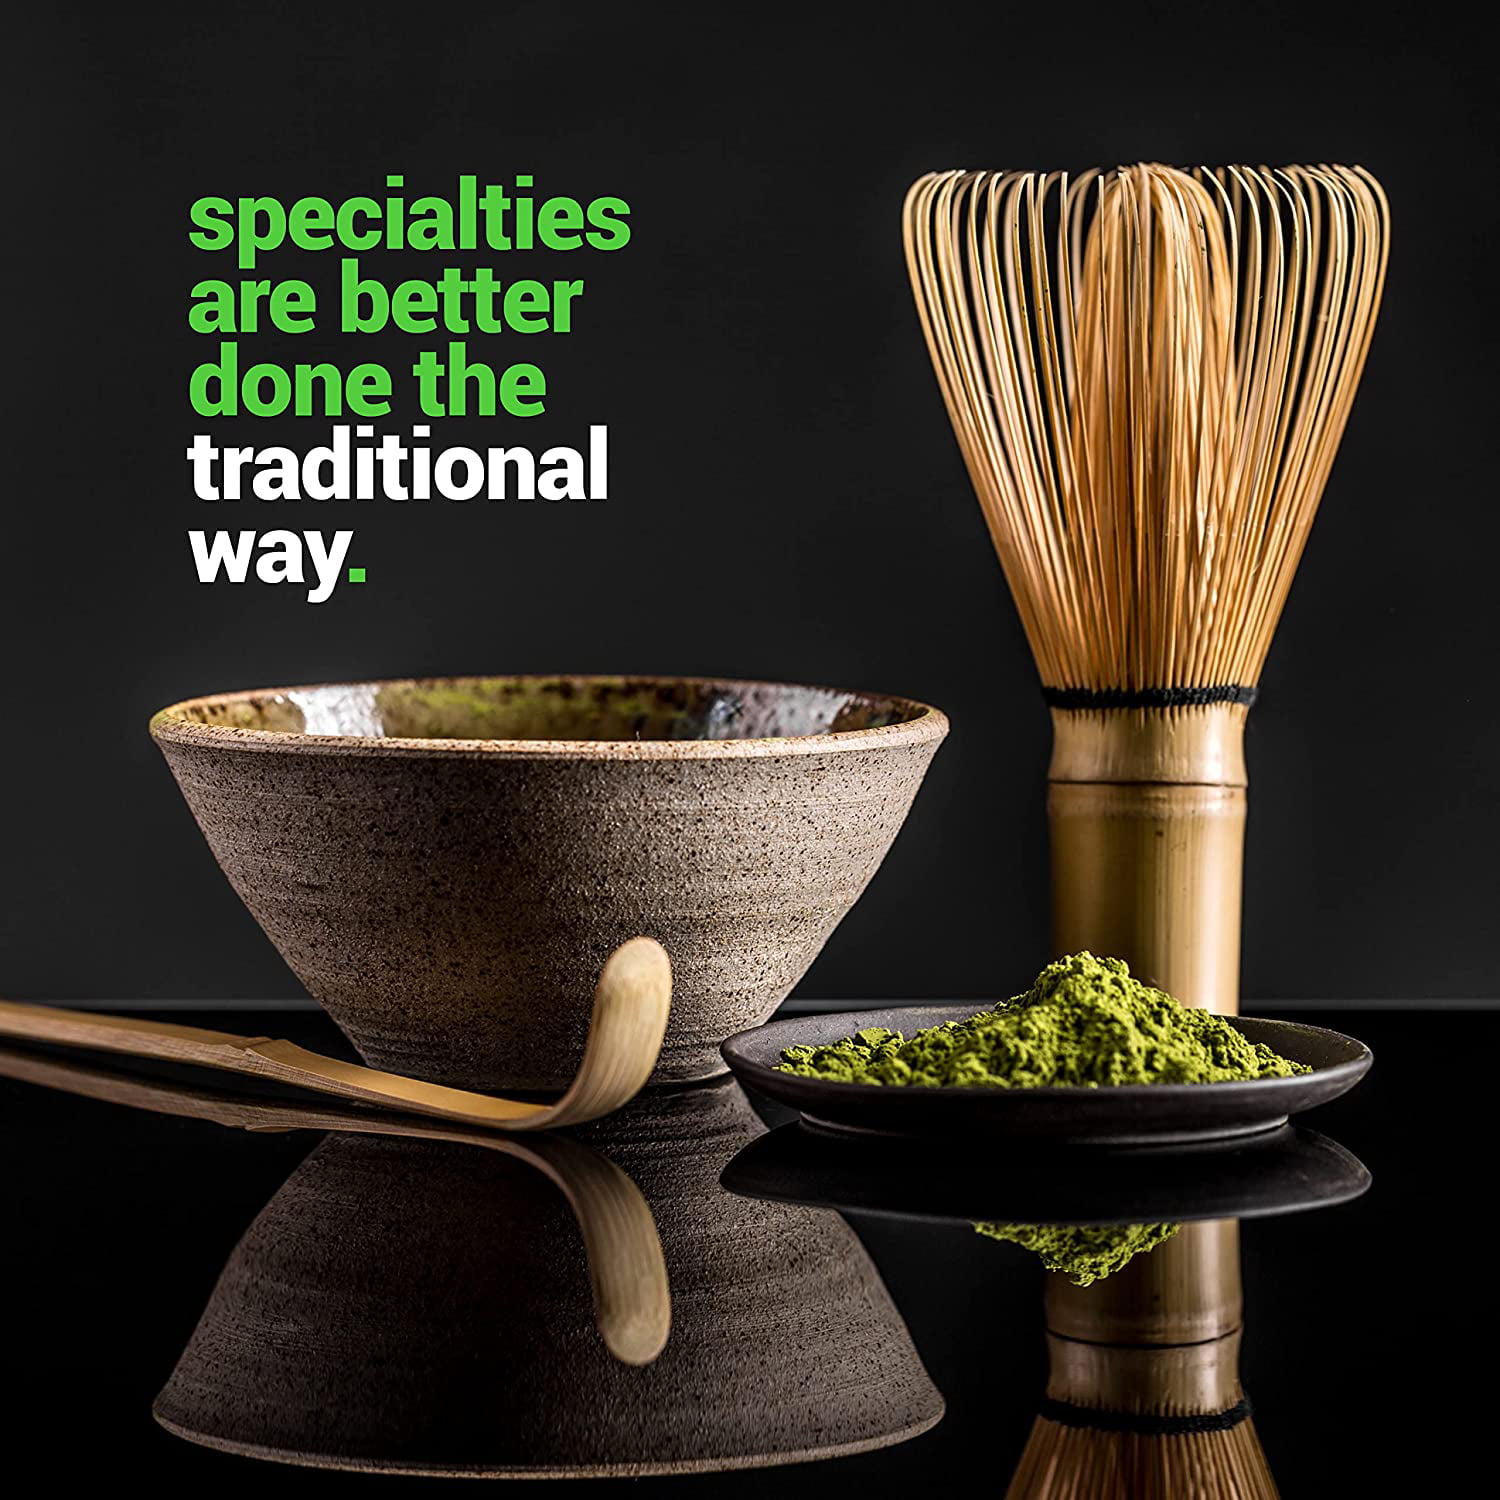 ZENRC Ceremony Matcha Kit - Bamboo Matcha Whisk (Chasen) Scoop (Chashaku)  Chawan Bowl with Pouring Spout Whisk Holder Strainer- The Perfect Matcha  Set